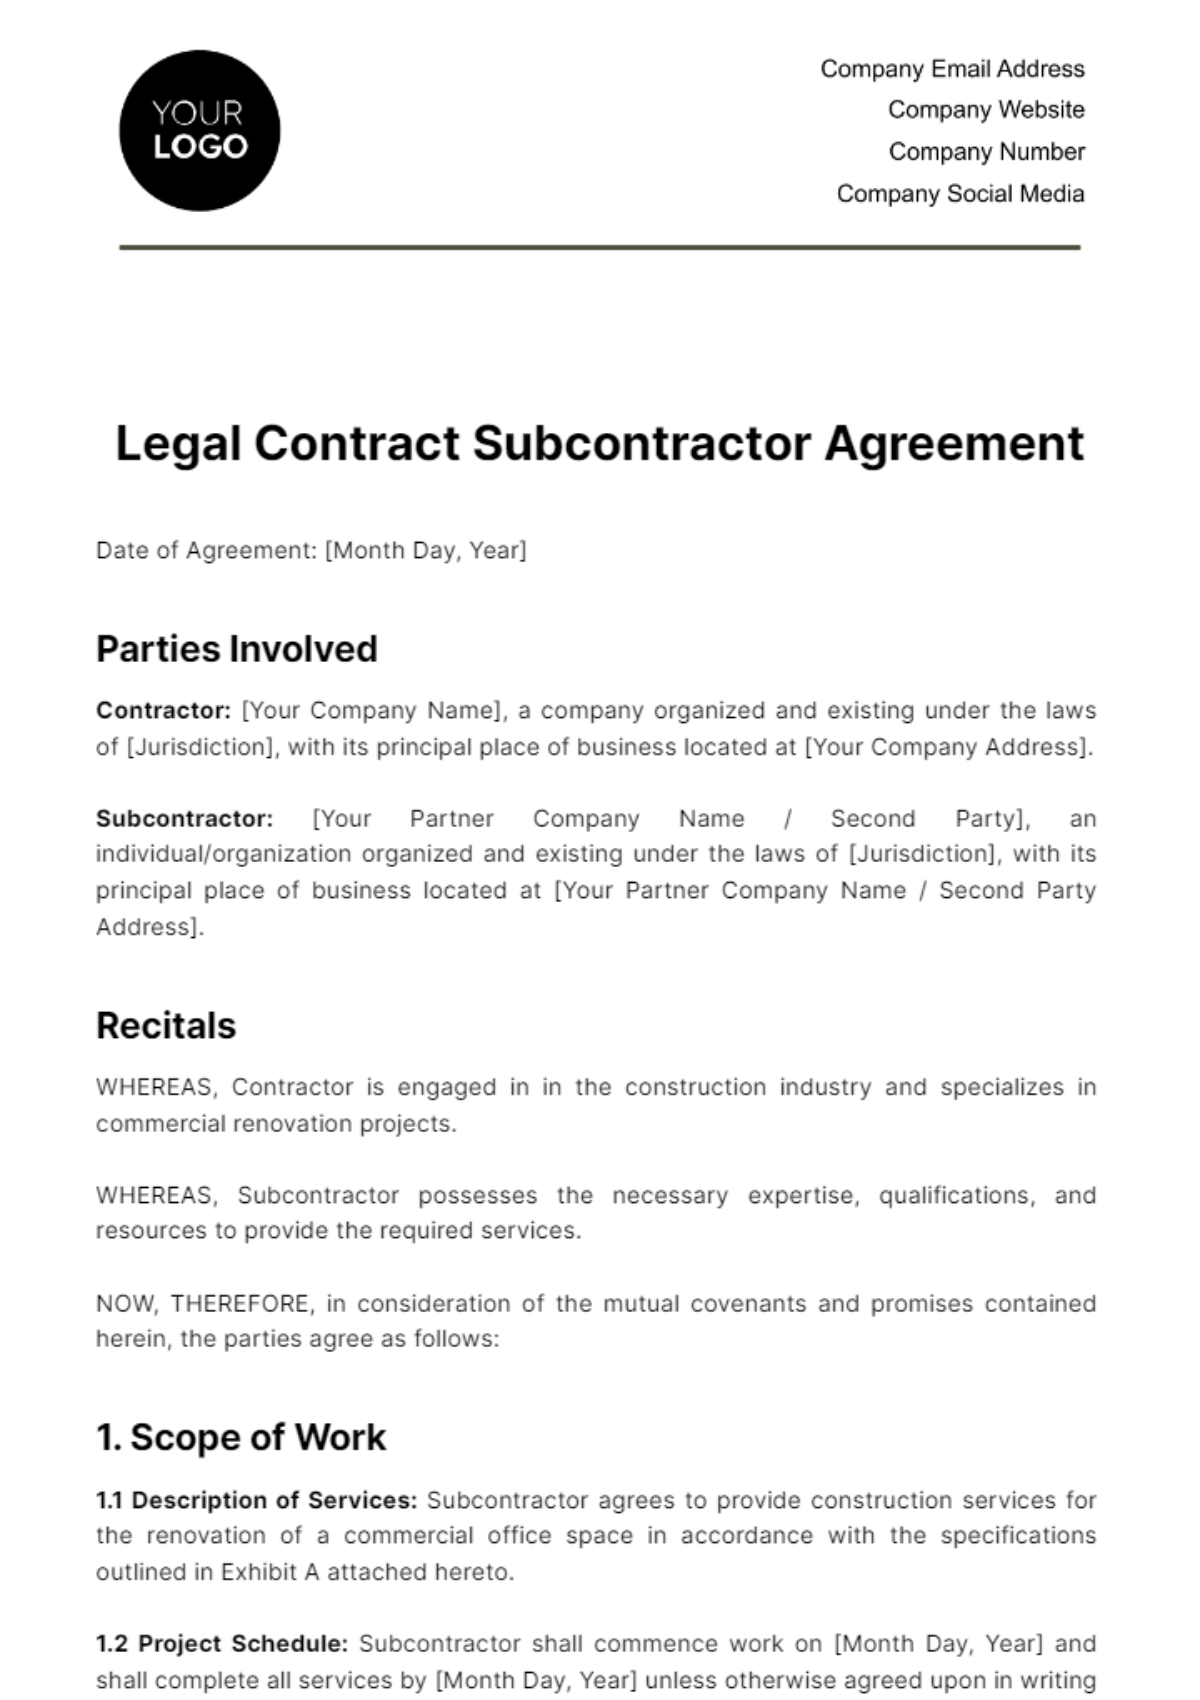 Legal Contract Subcontractor Agreement Template